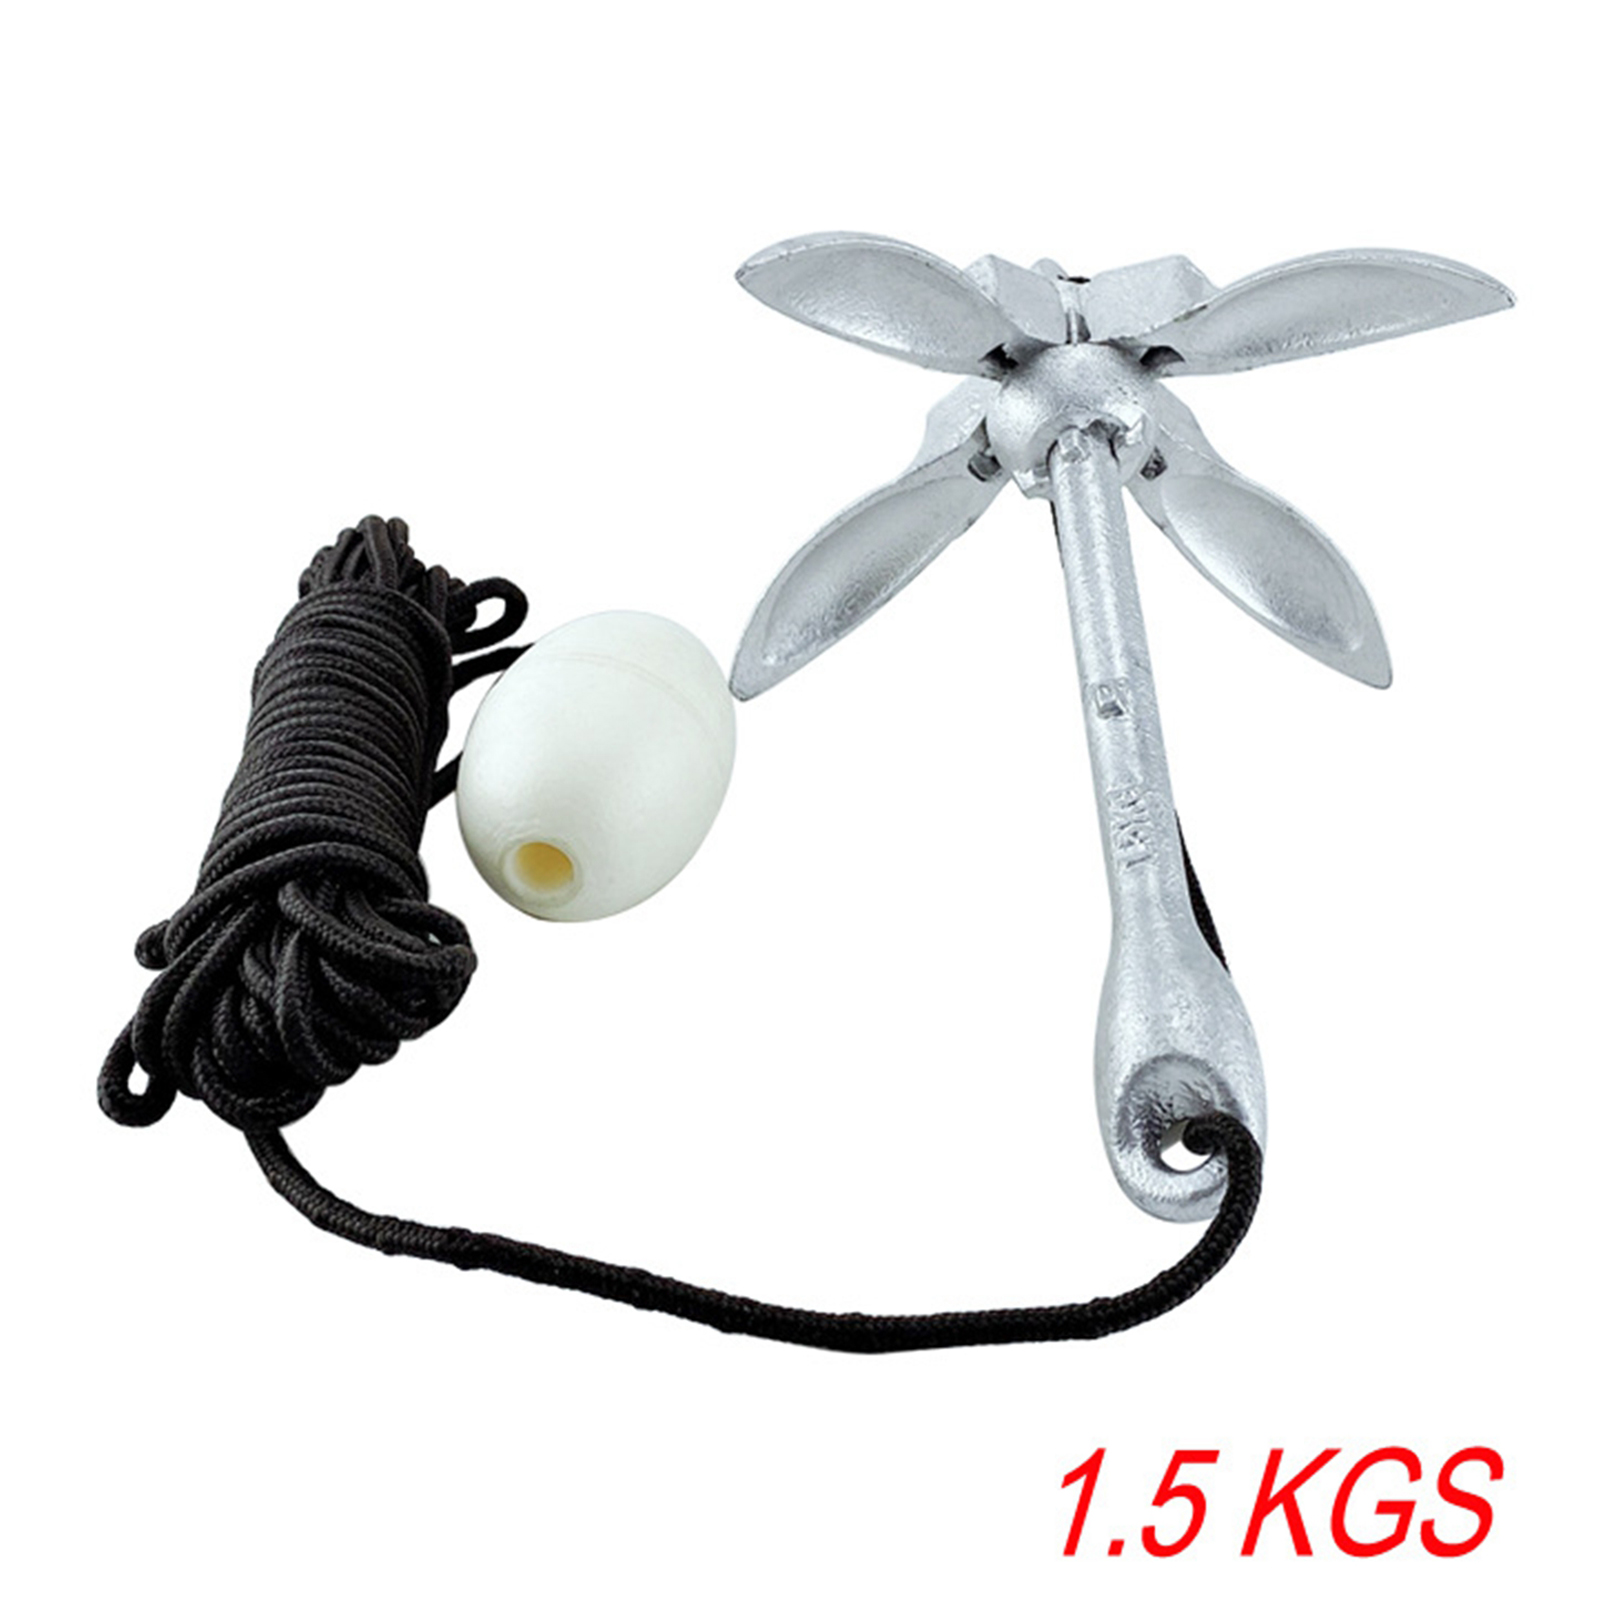 Details about   Folding Kayak Anchor Boat Canoe Fishing Sailboat Portable Foldable Grapnel Rope 